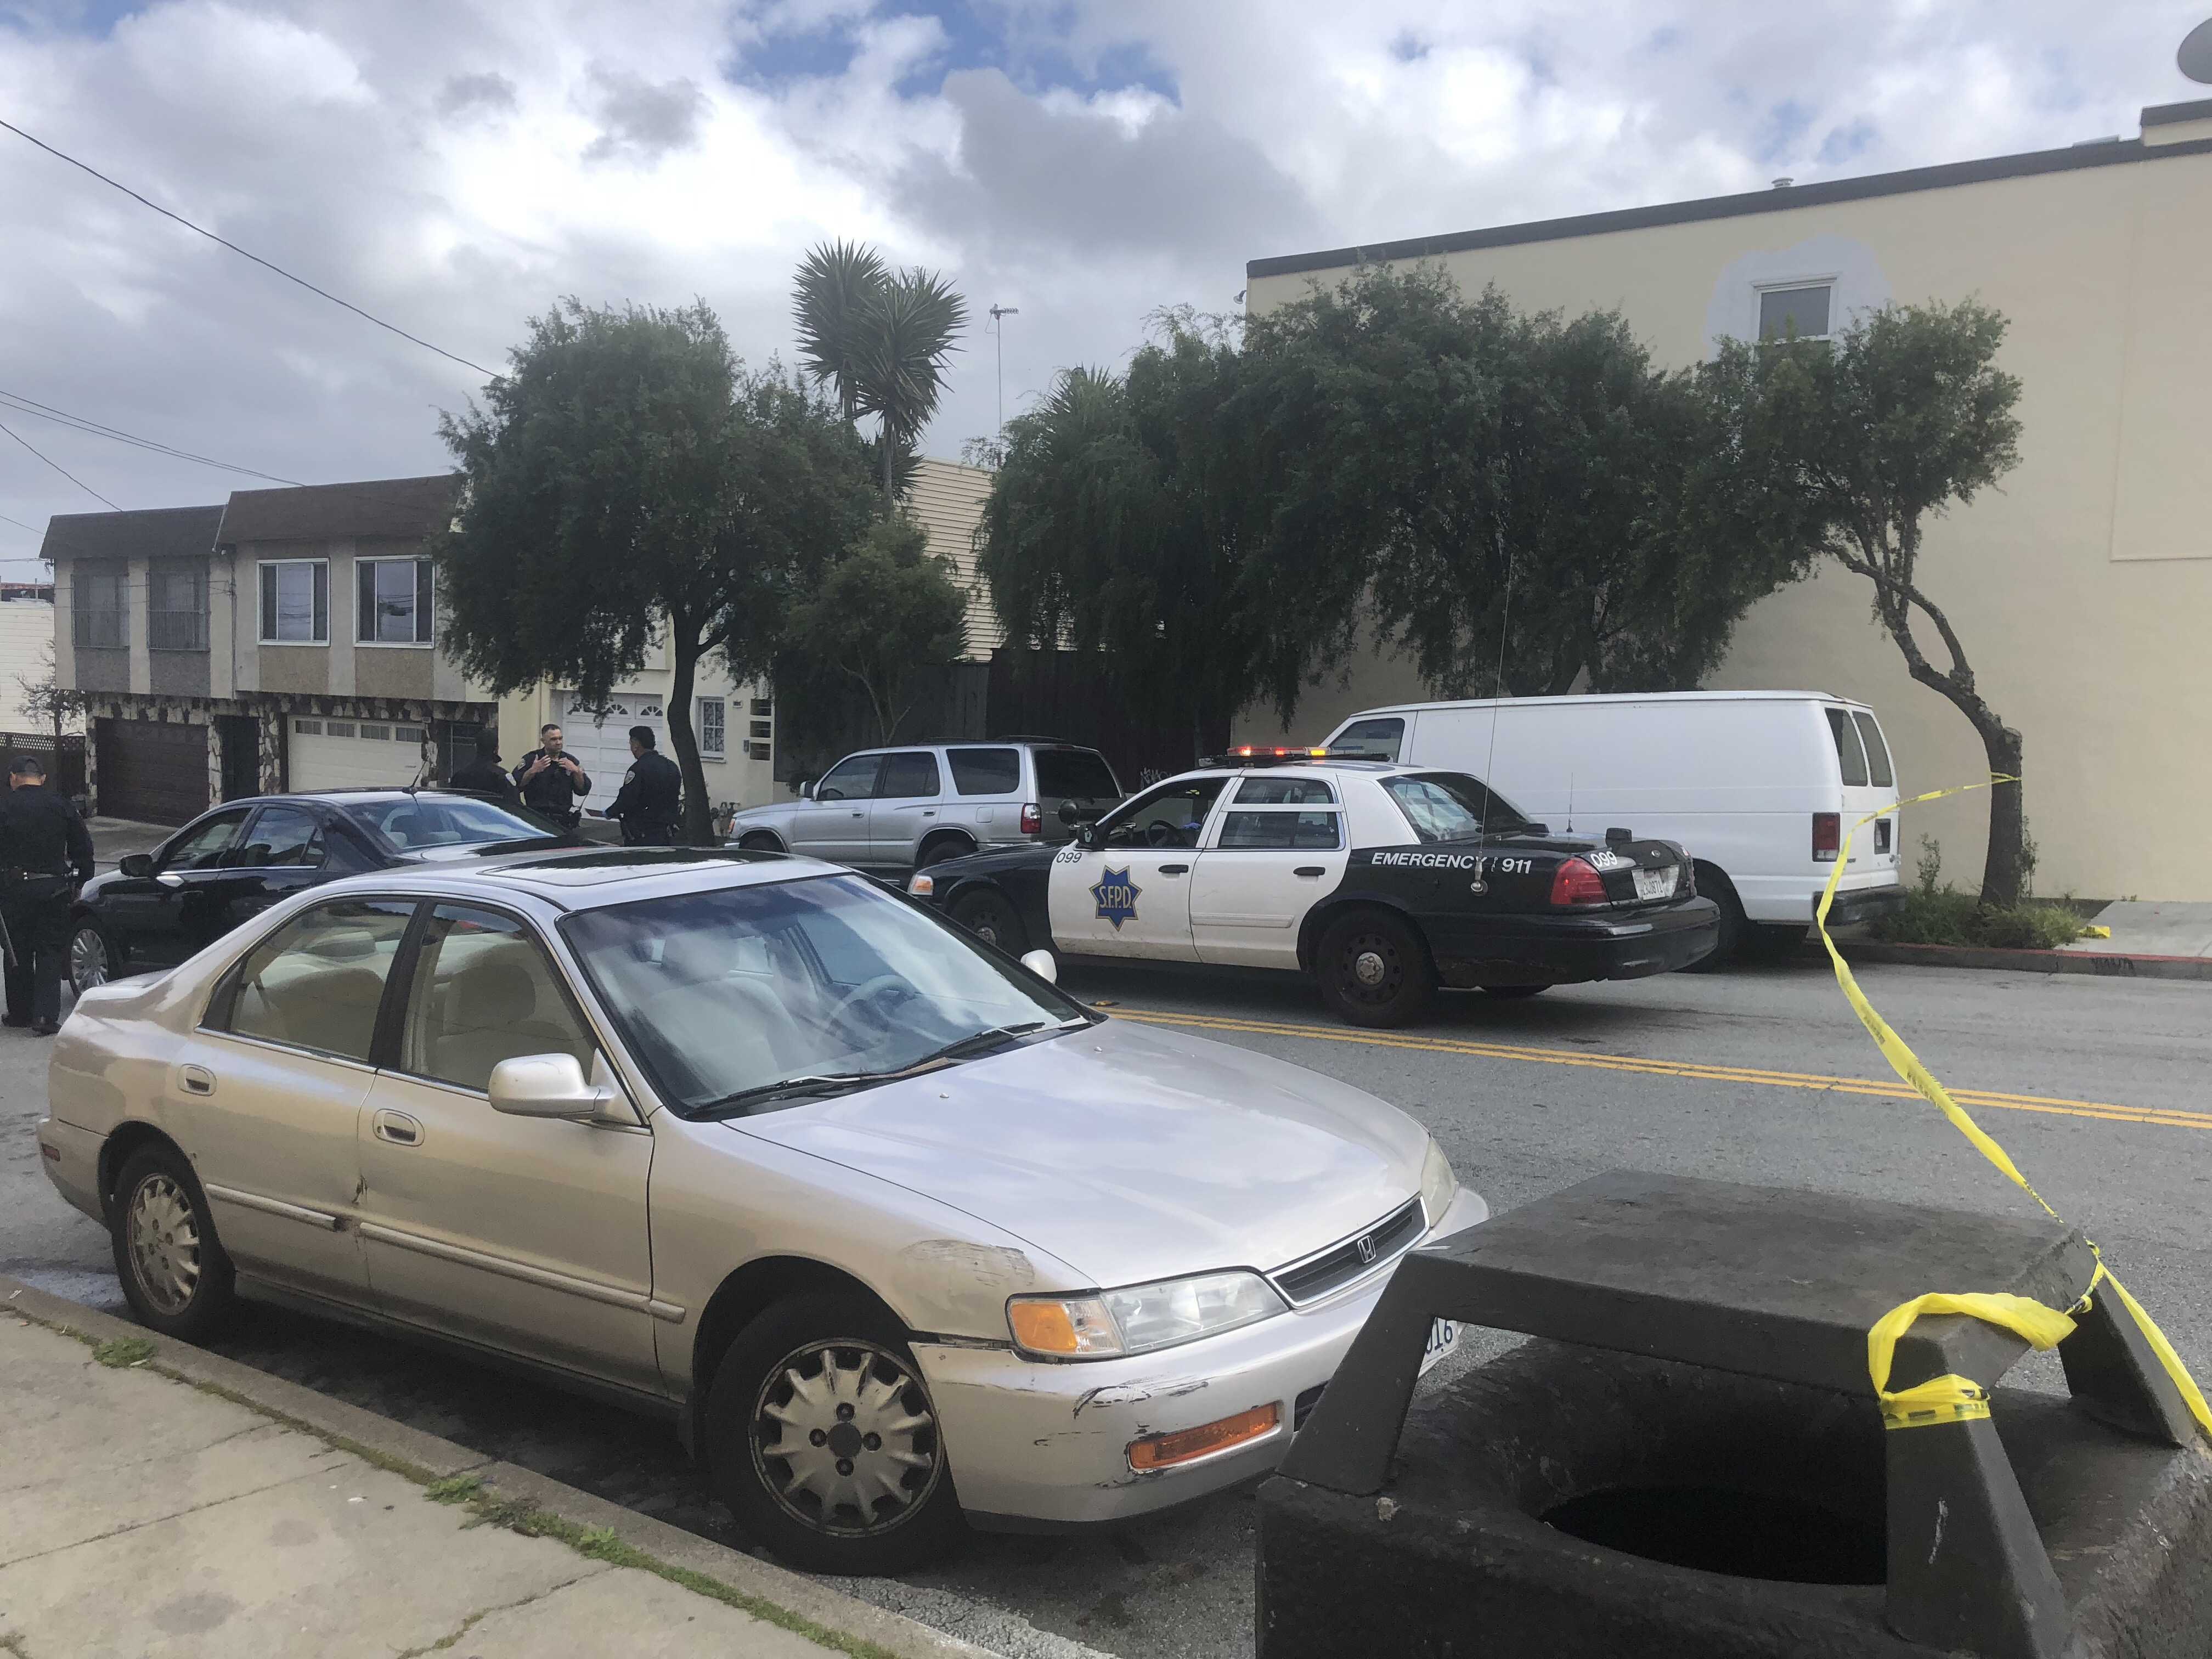 Police block off the scene of a drive by shooting near the intersection of Madison and Felton streets Thursday, March 1, in San Francisco. (Lea Loeb/Golden Gate Xpress)